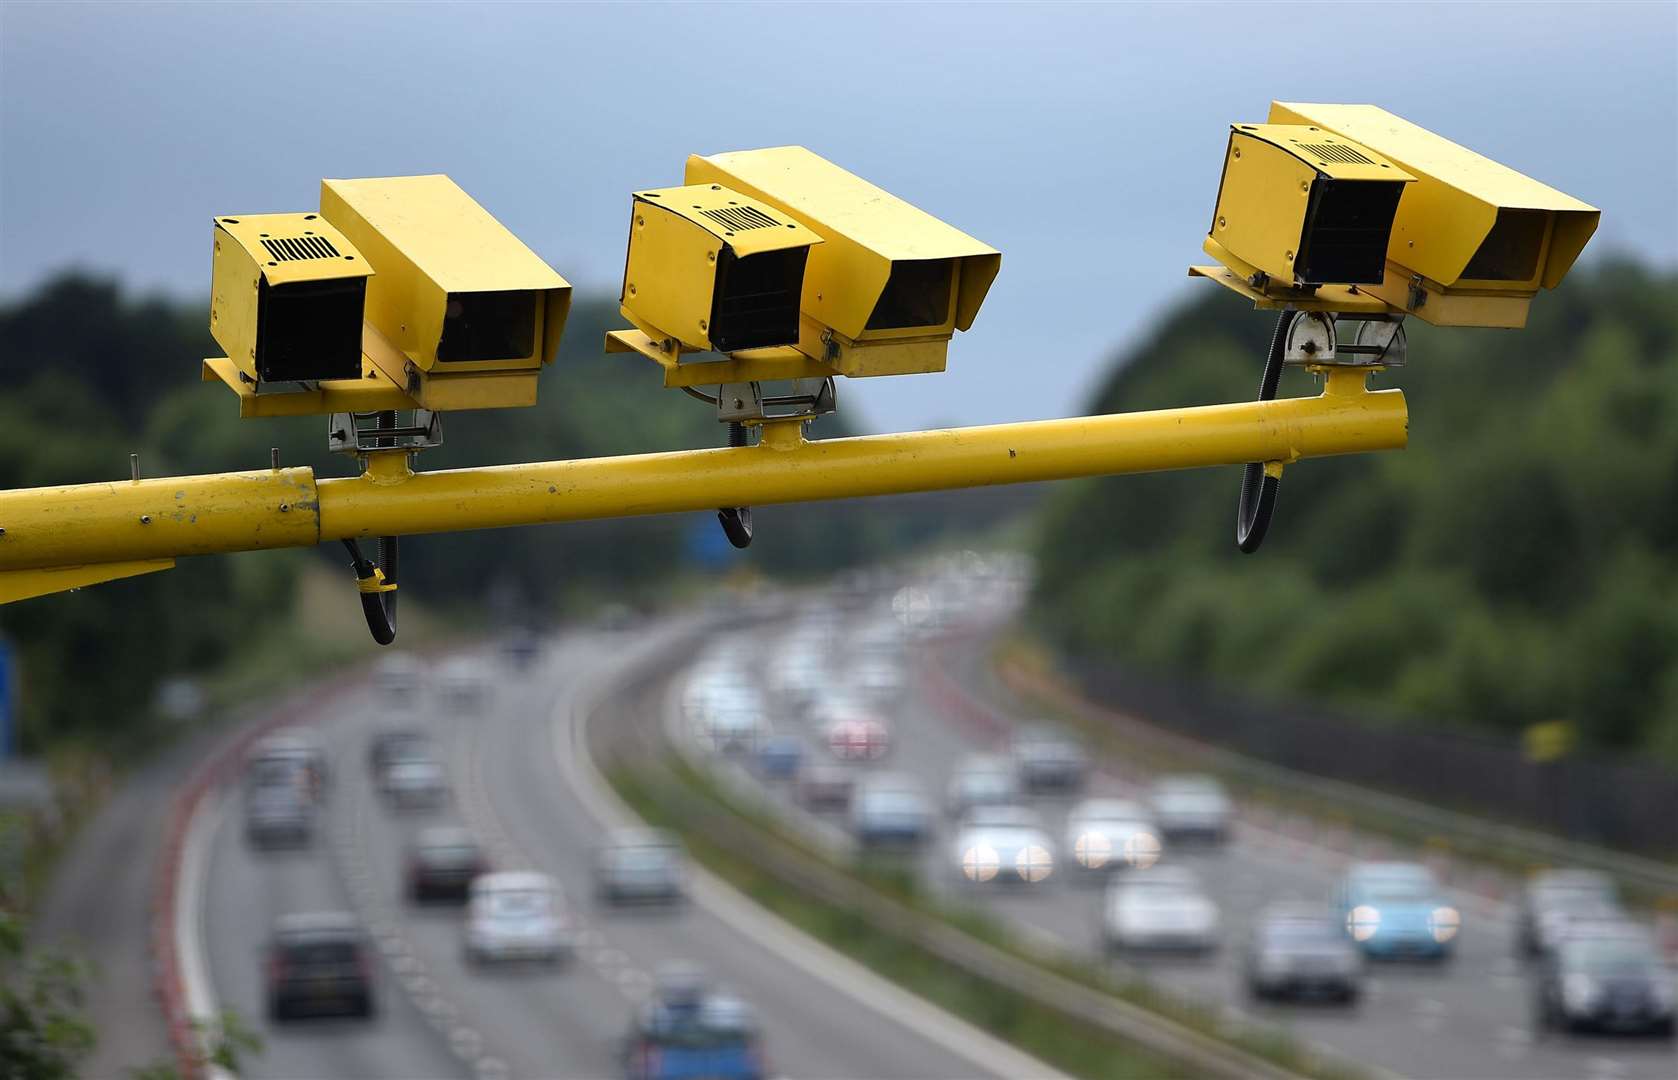 Evidence against the men accused is said to come from ANPR cameras